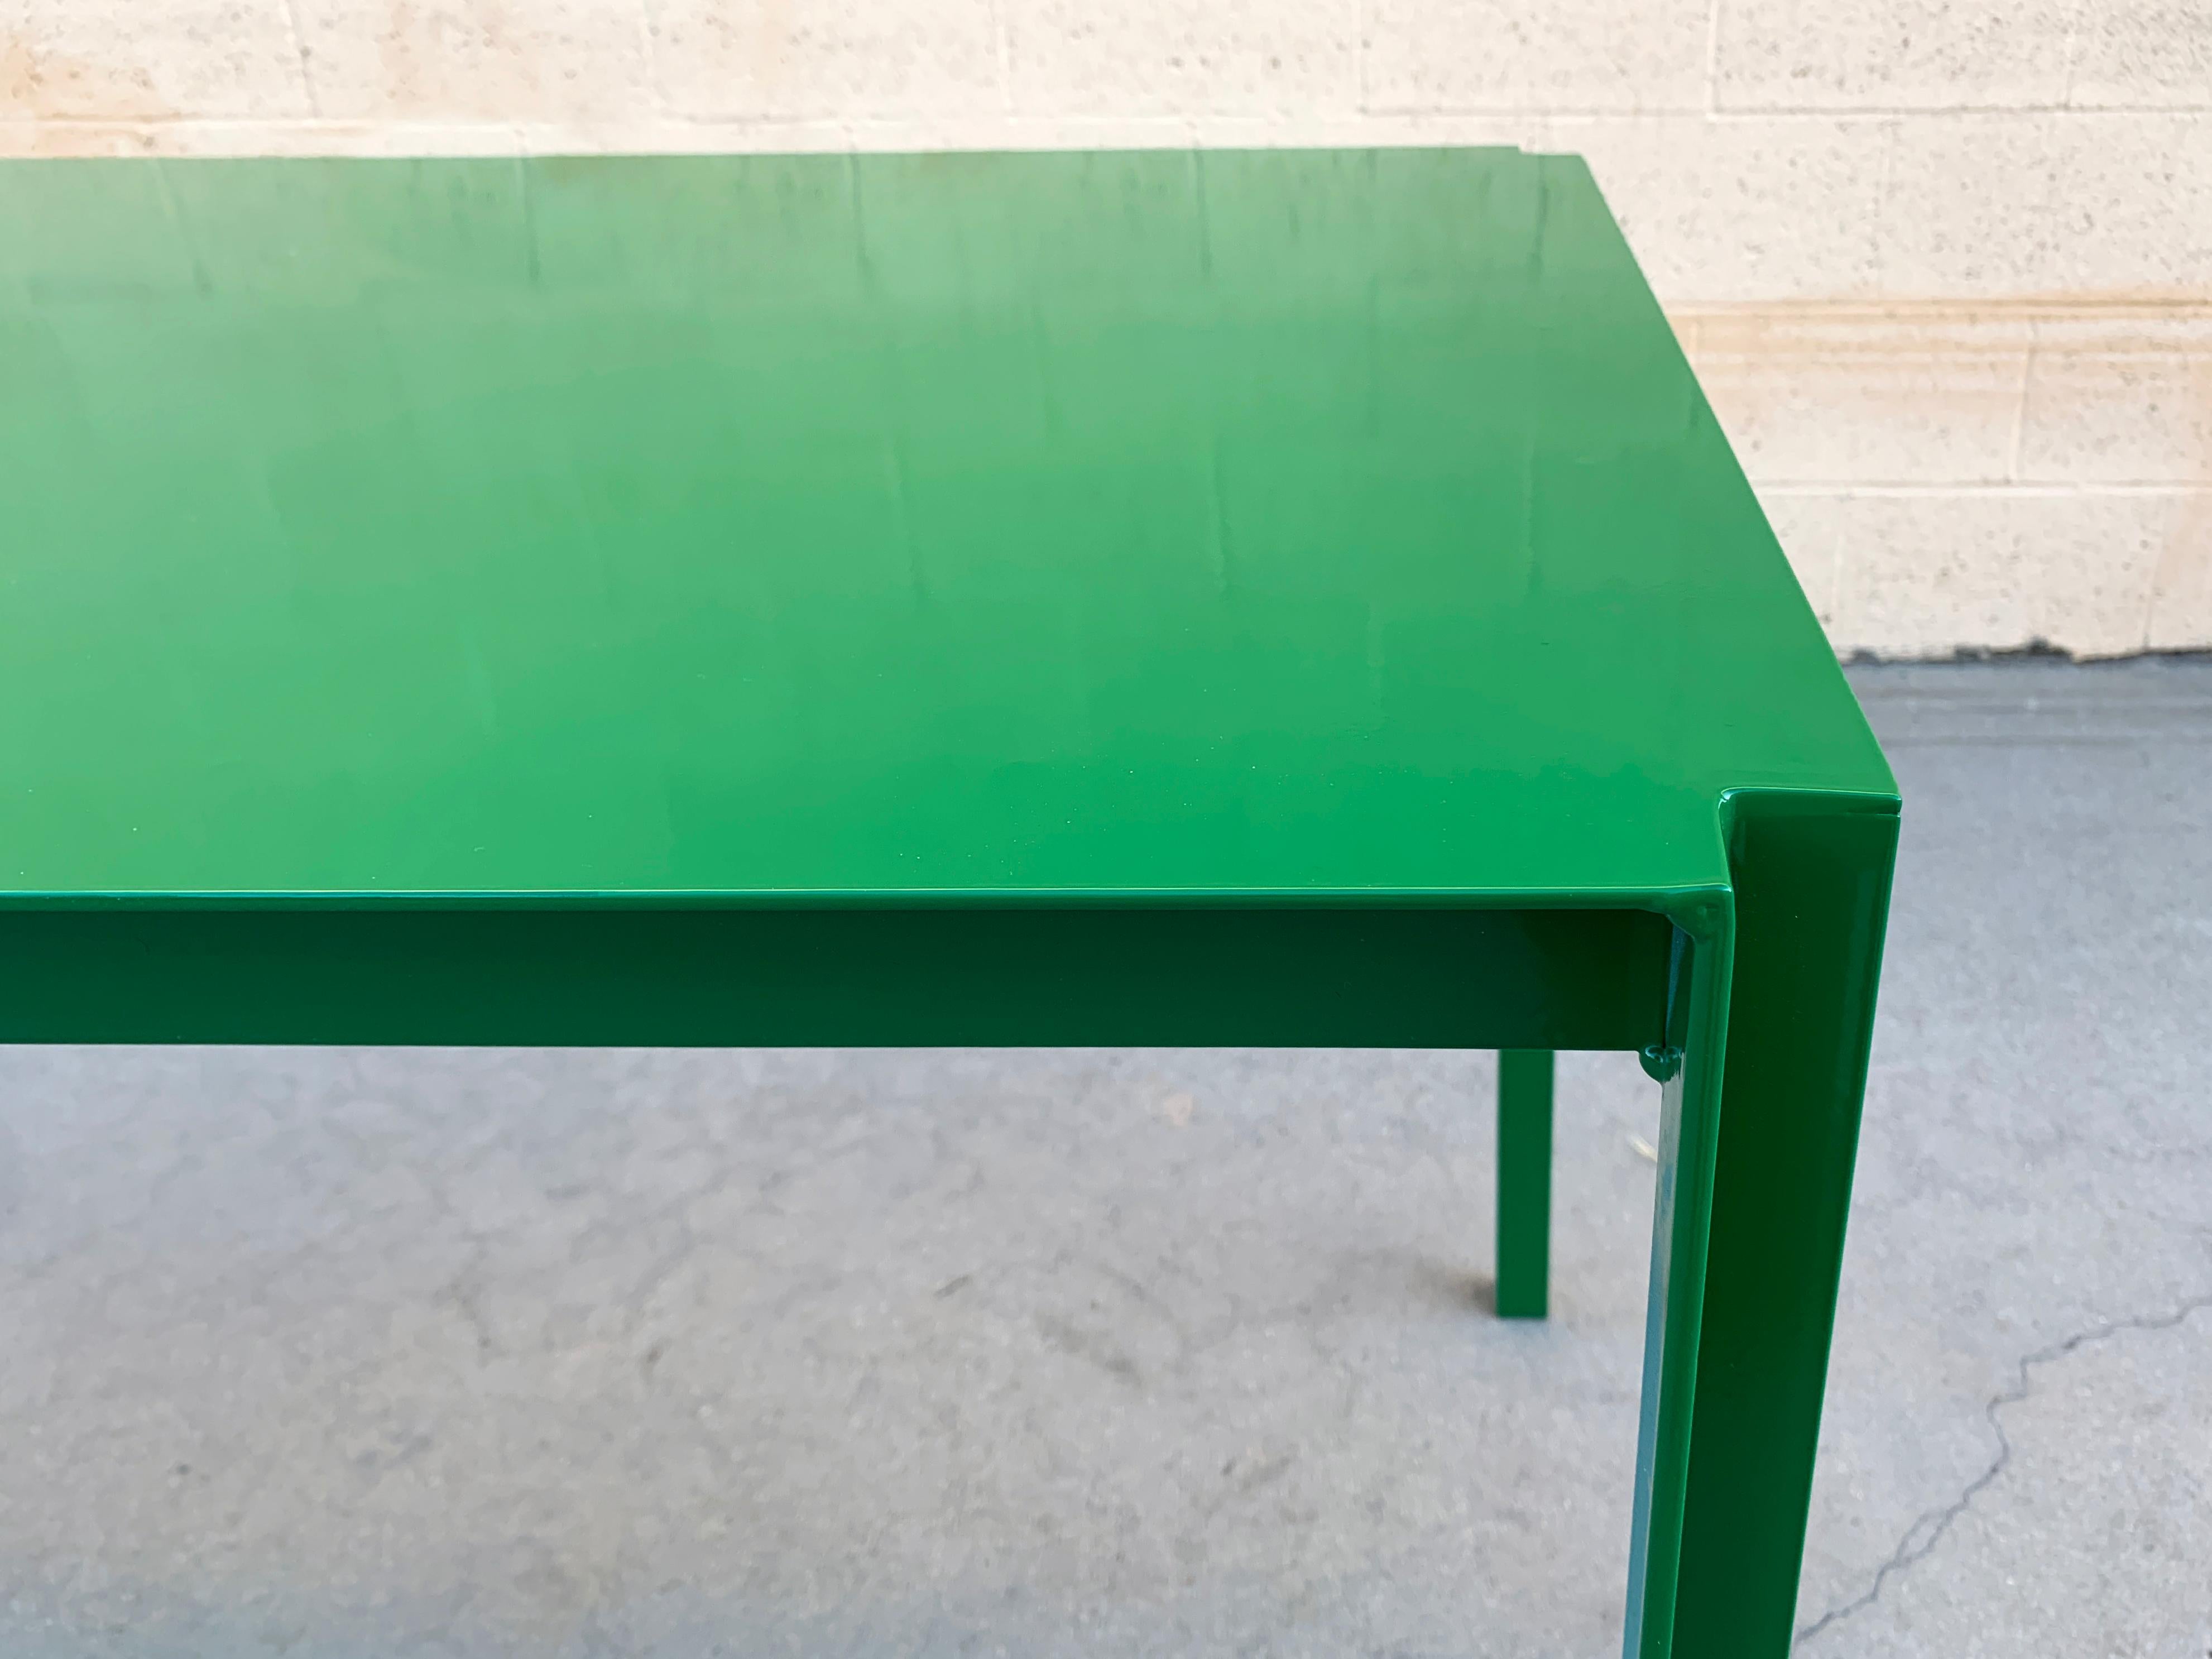 Minimalist Tanker Inspired Steel Dining or Work Table Made to Order, Custom Colors For Sale